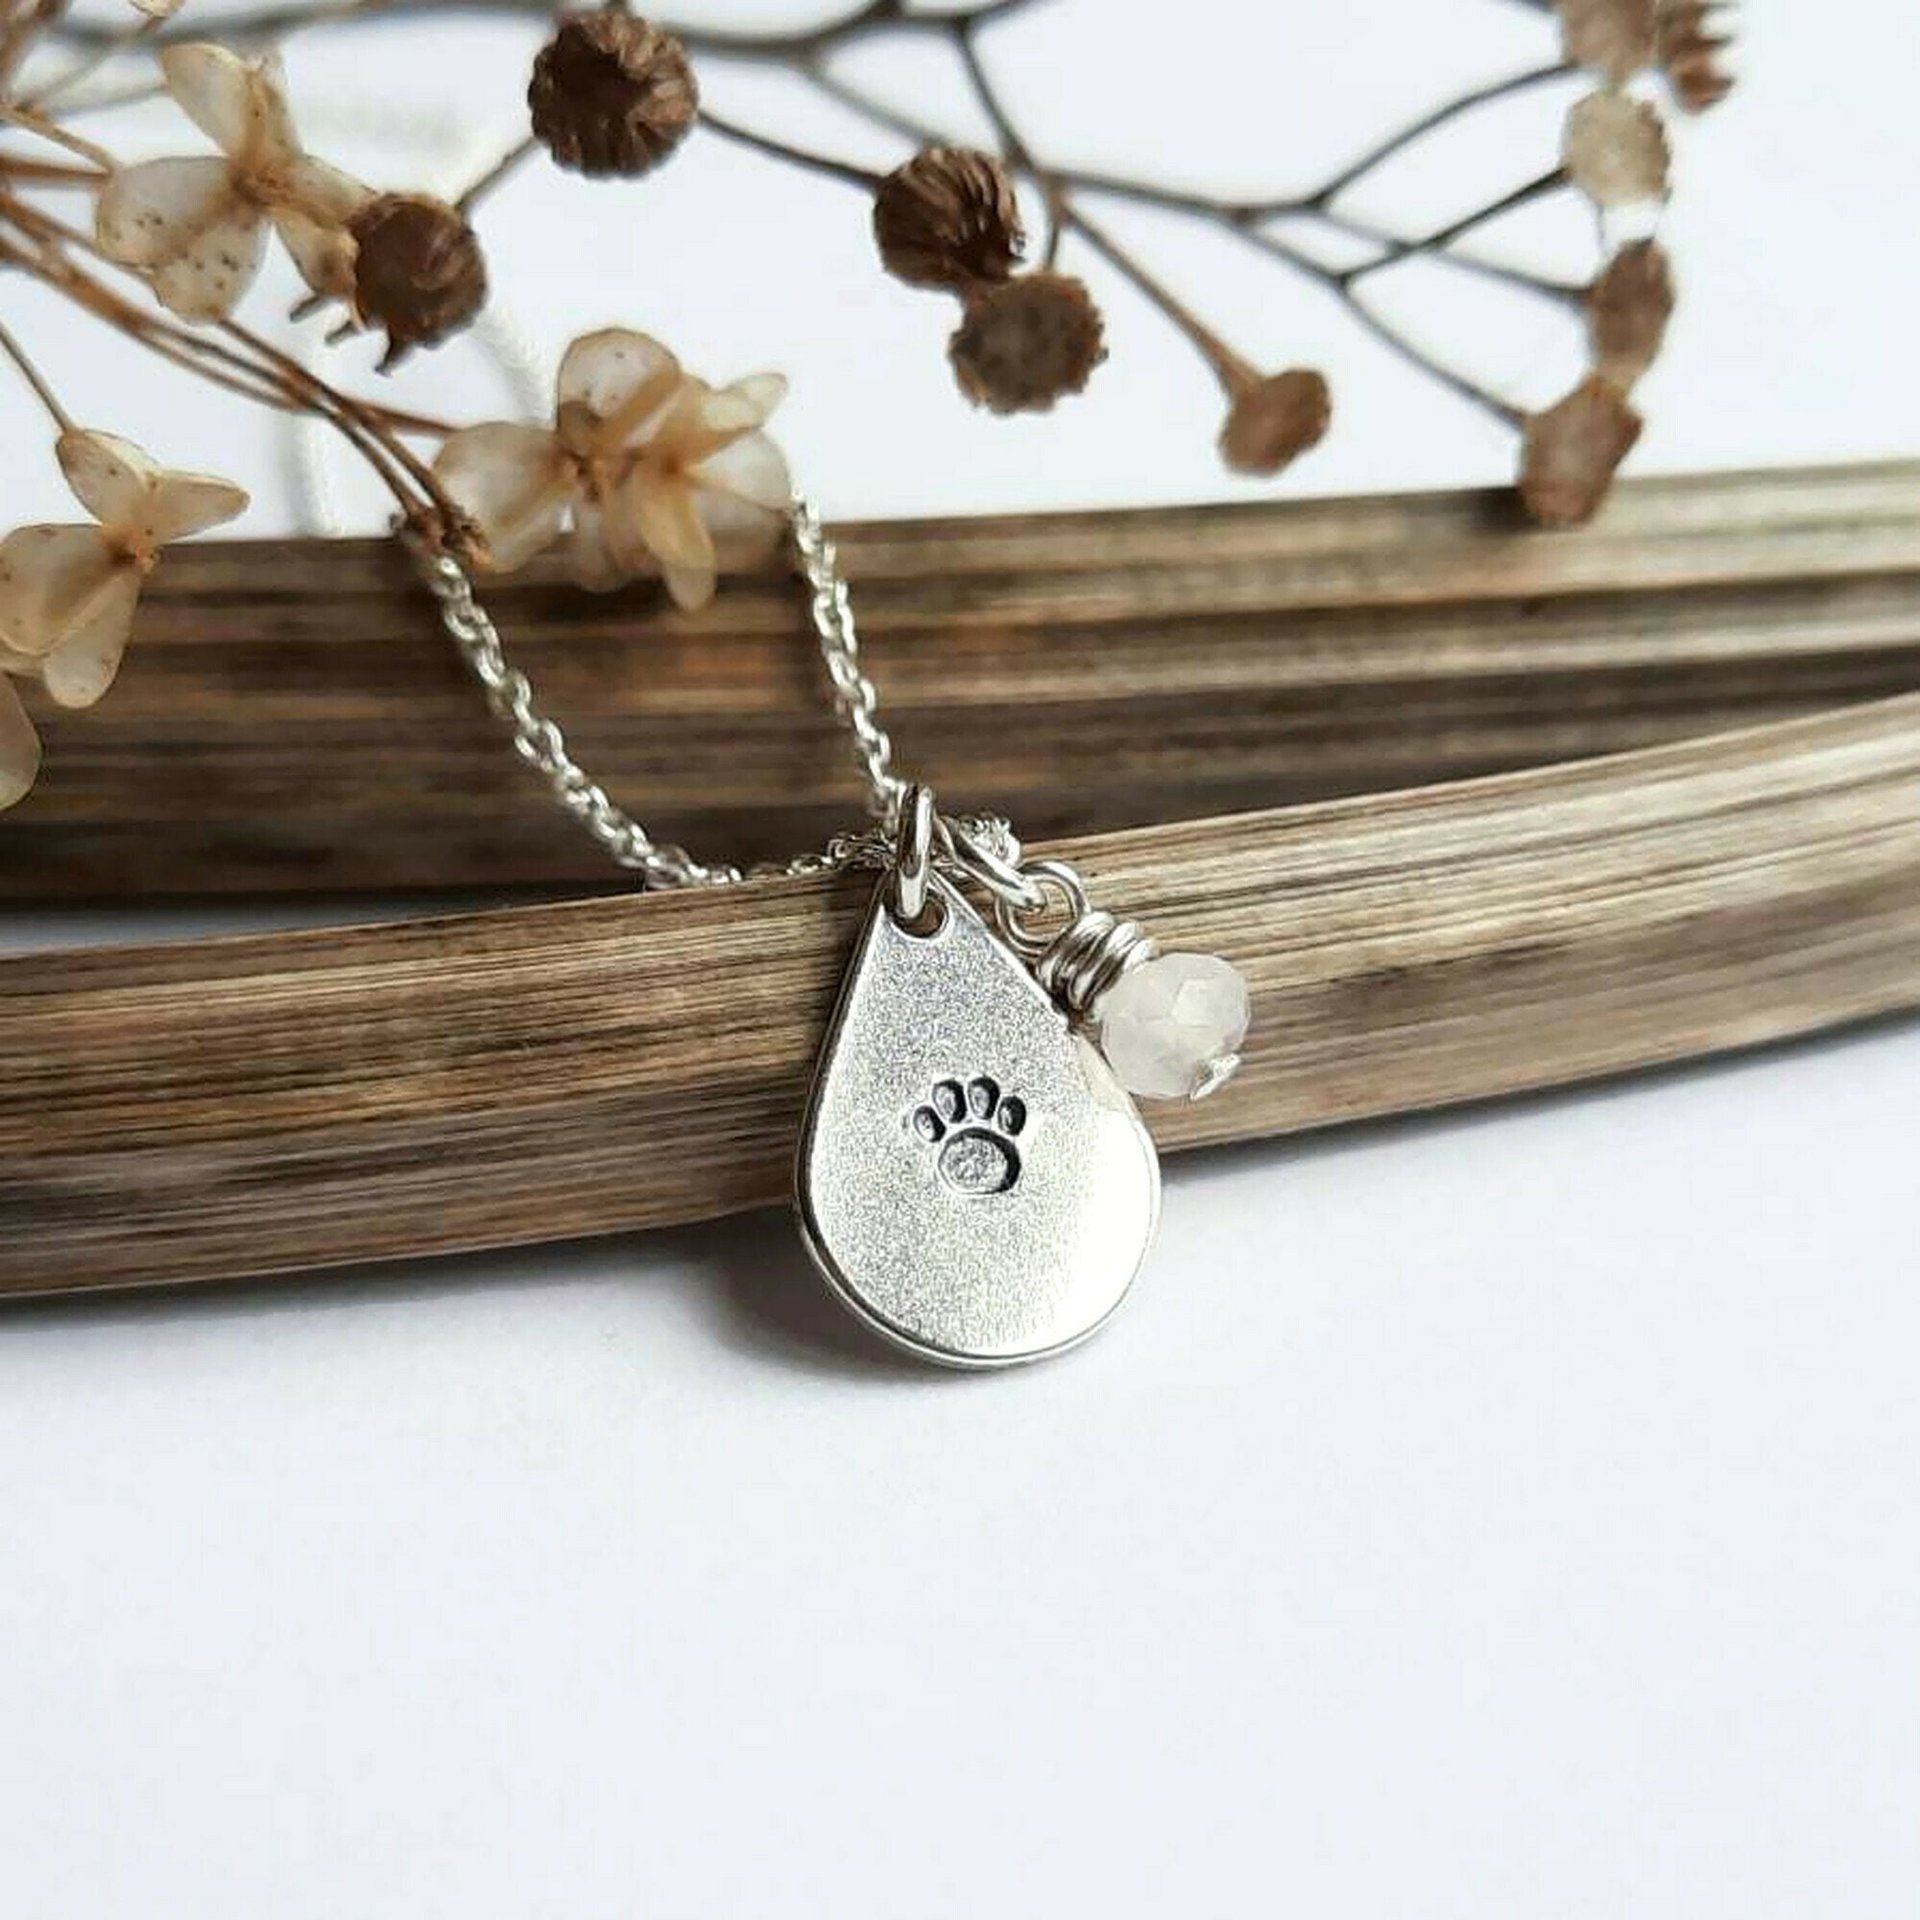 Silver Paw Print Teardrop Necklace with Rose Quartz Charm ~ Handmade by The Tiny Tree Frog Jewellery